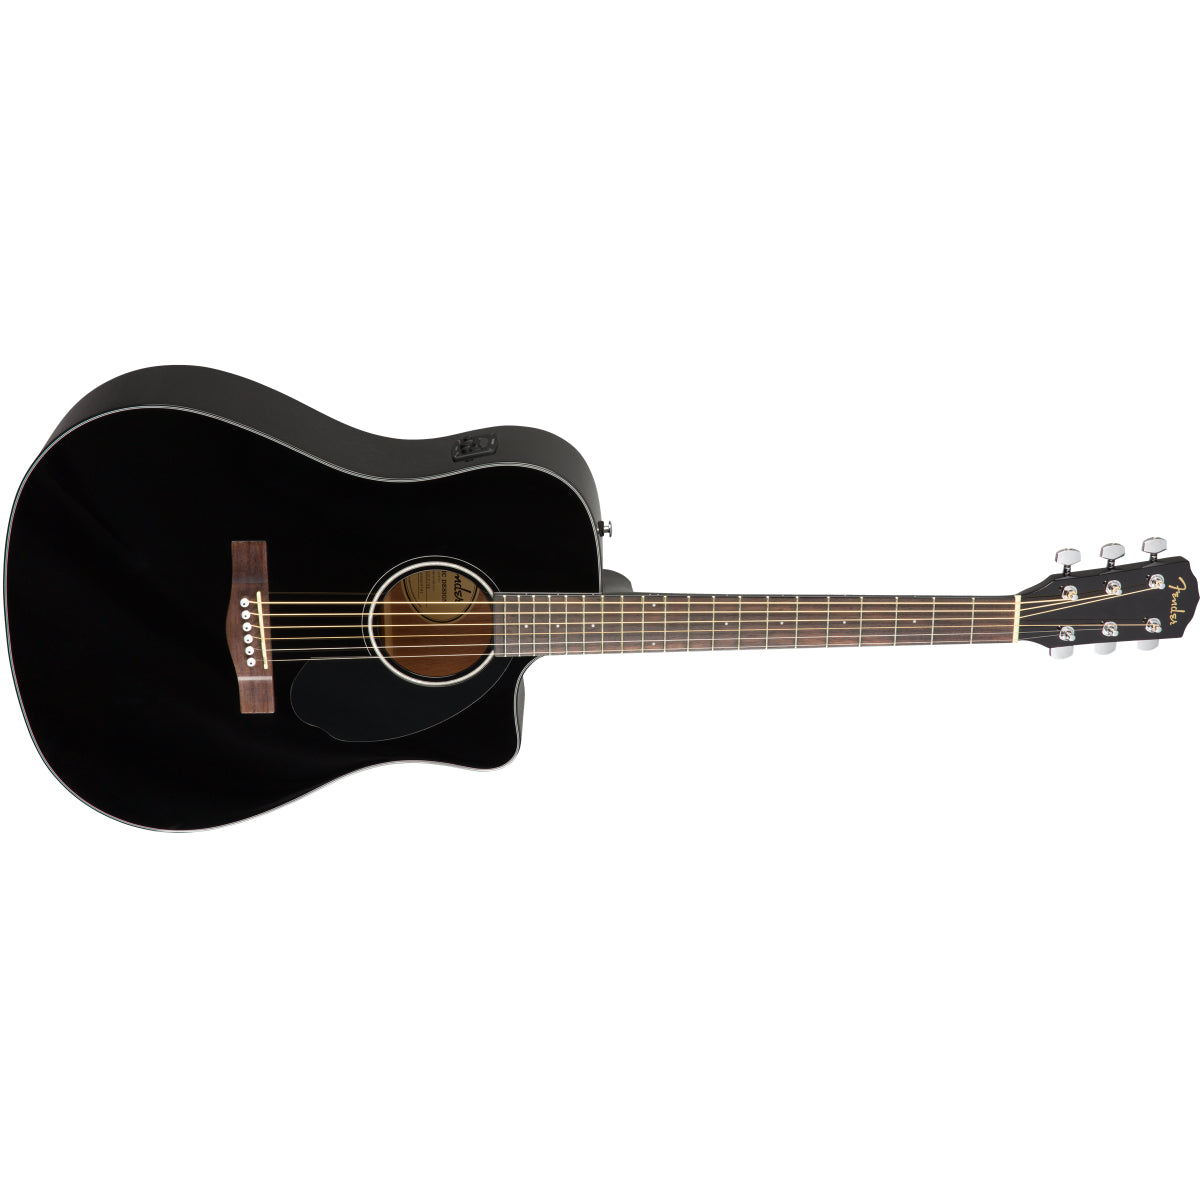 CD-60SCE Black Electro-Acoustic Guitar (With tuner Preamp), Solid Top